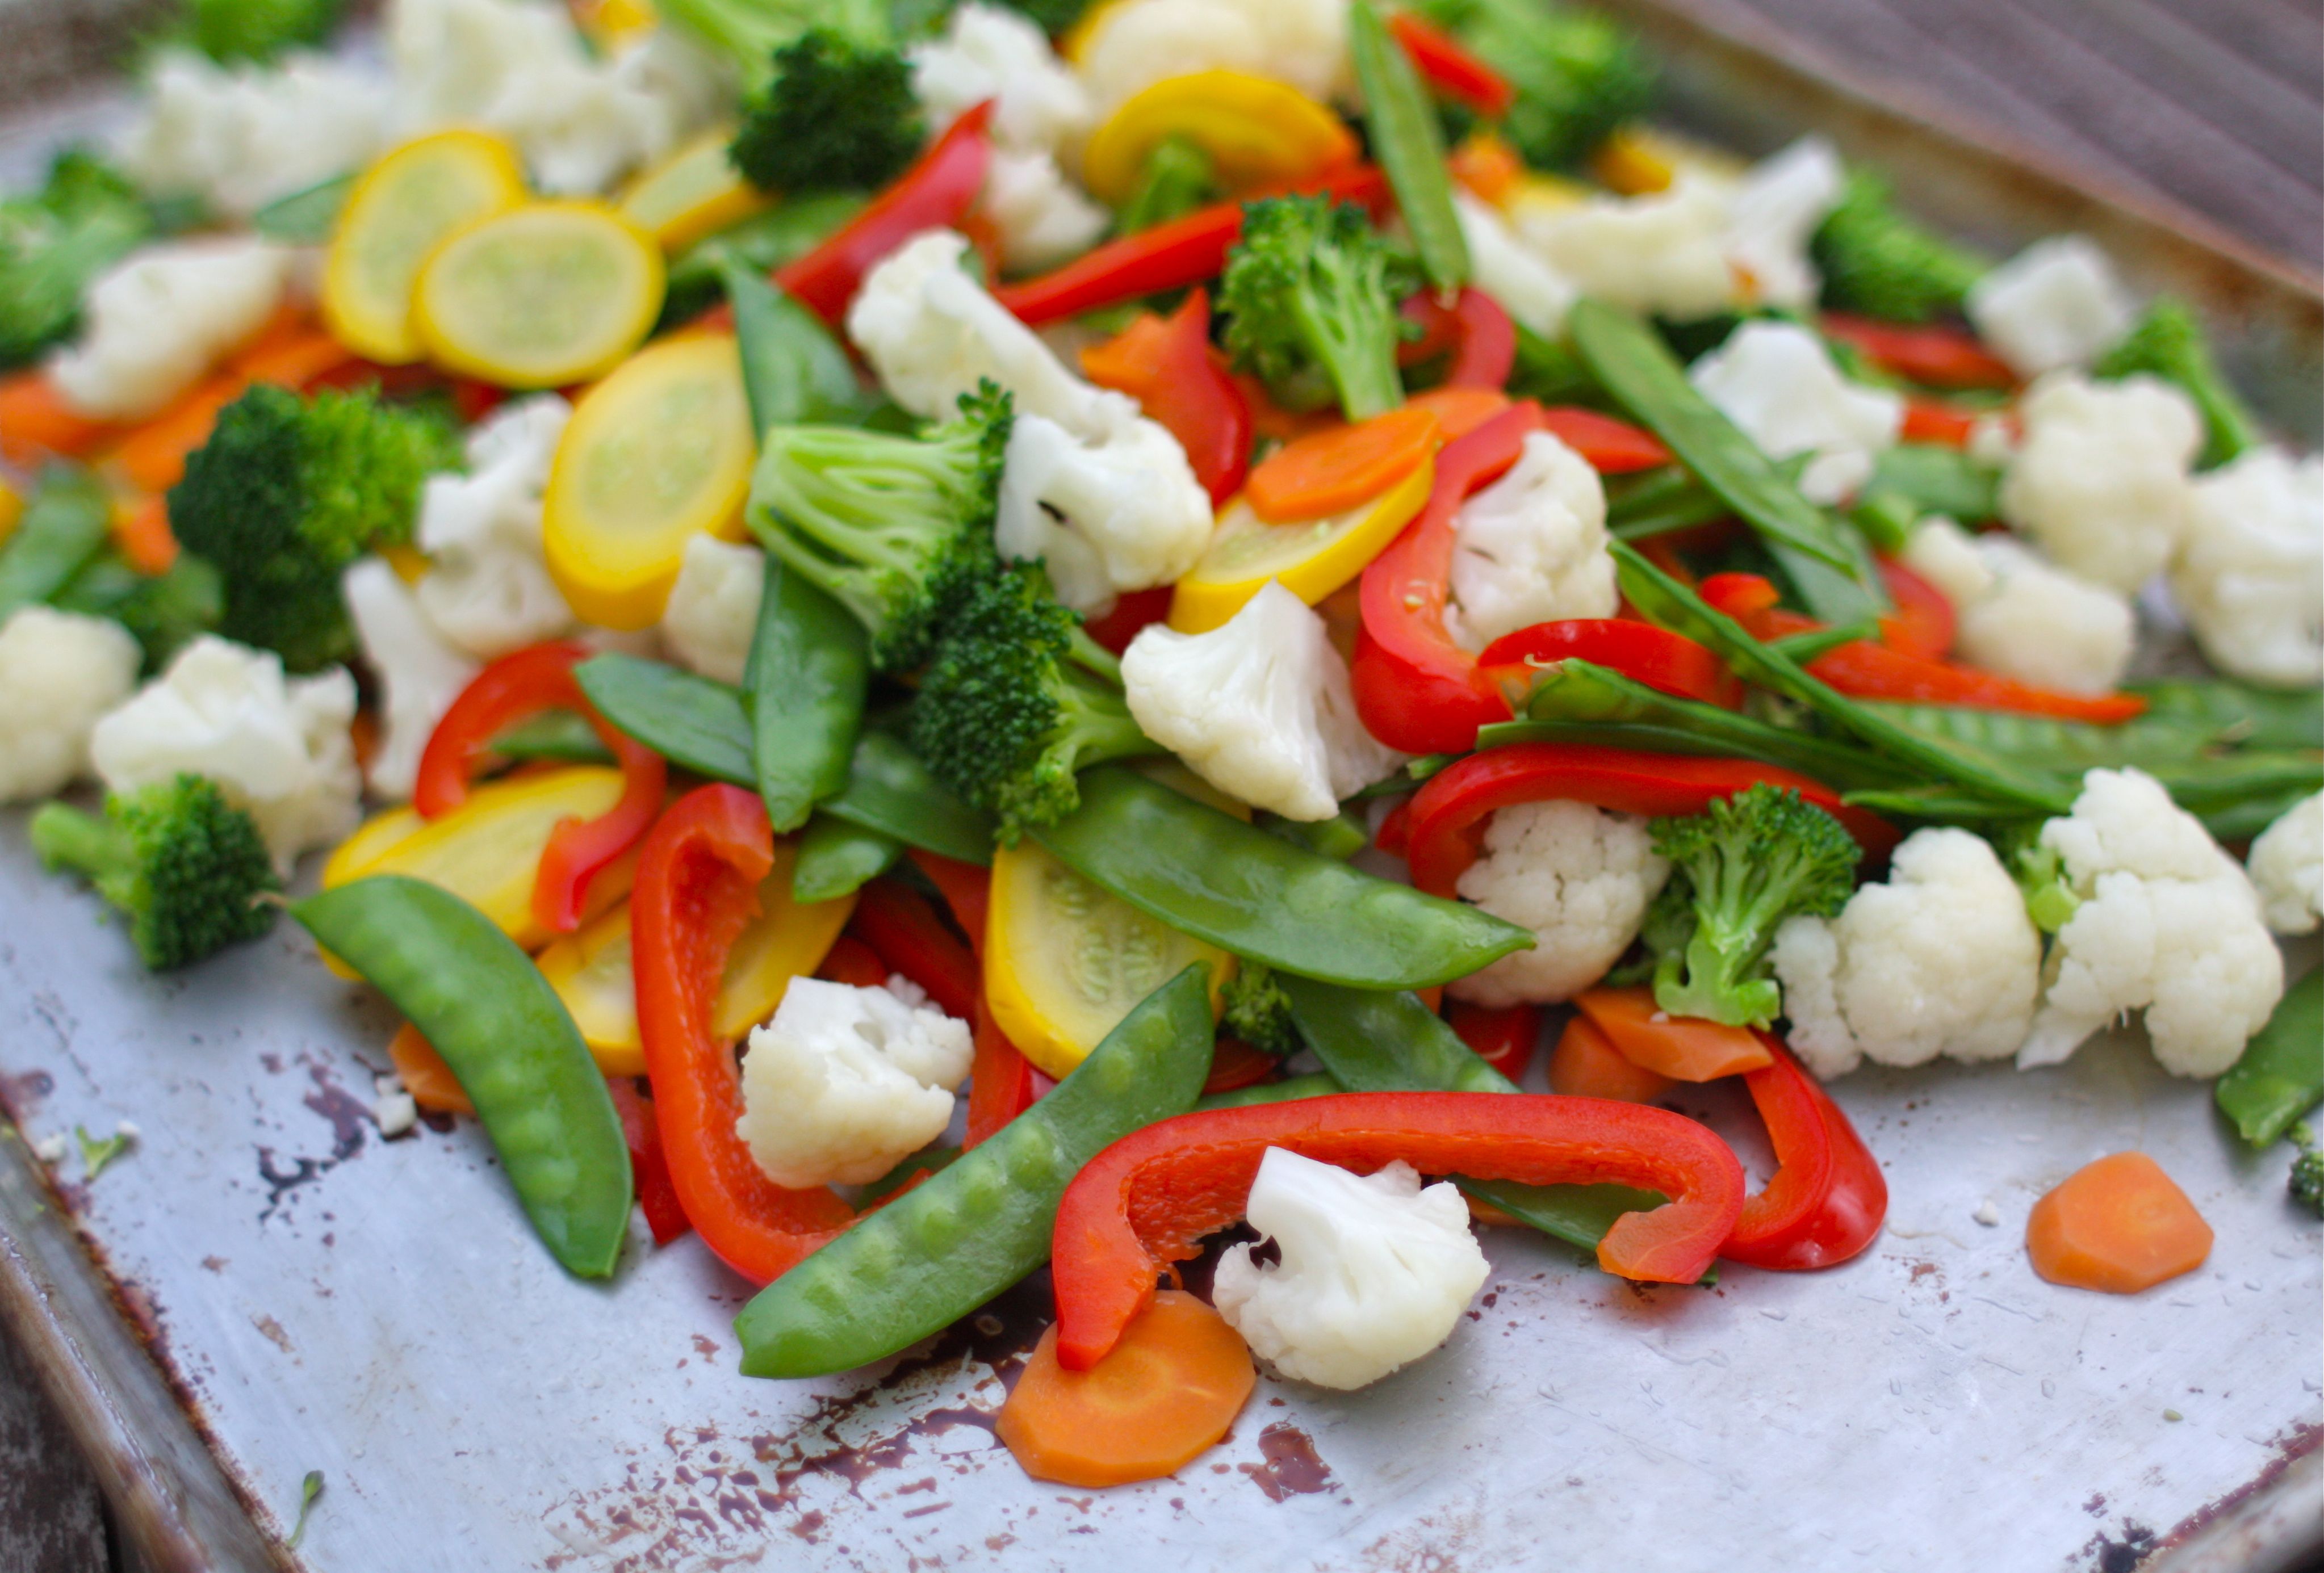 Recommended stir-fry vegetables and blanching times: